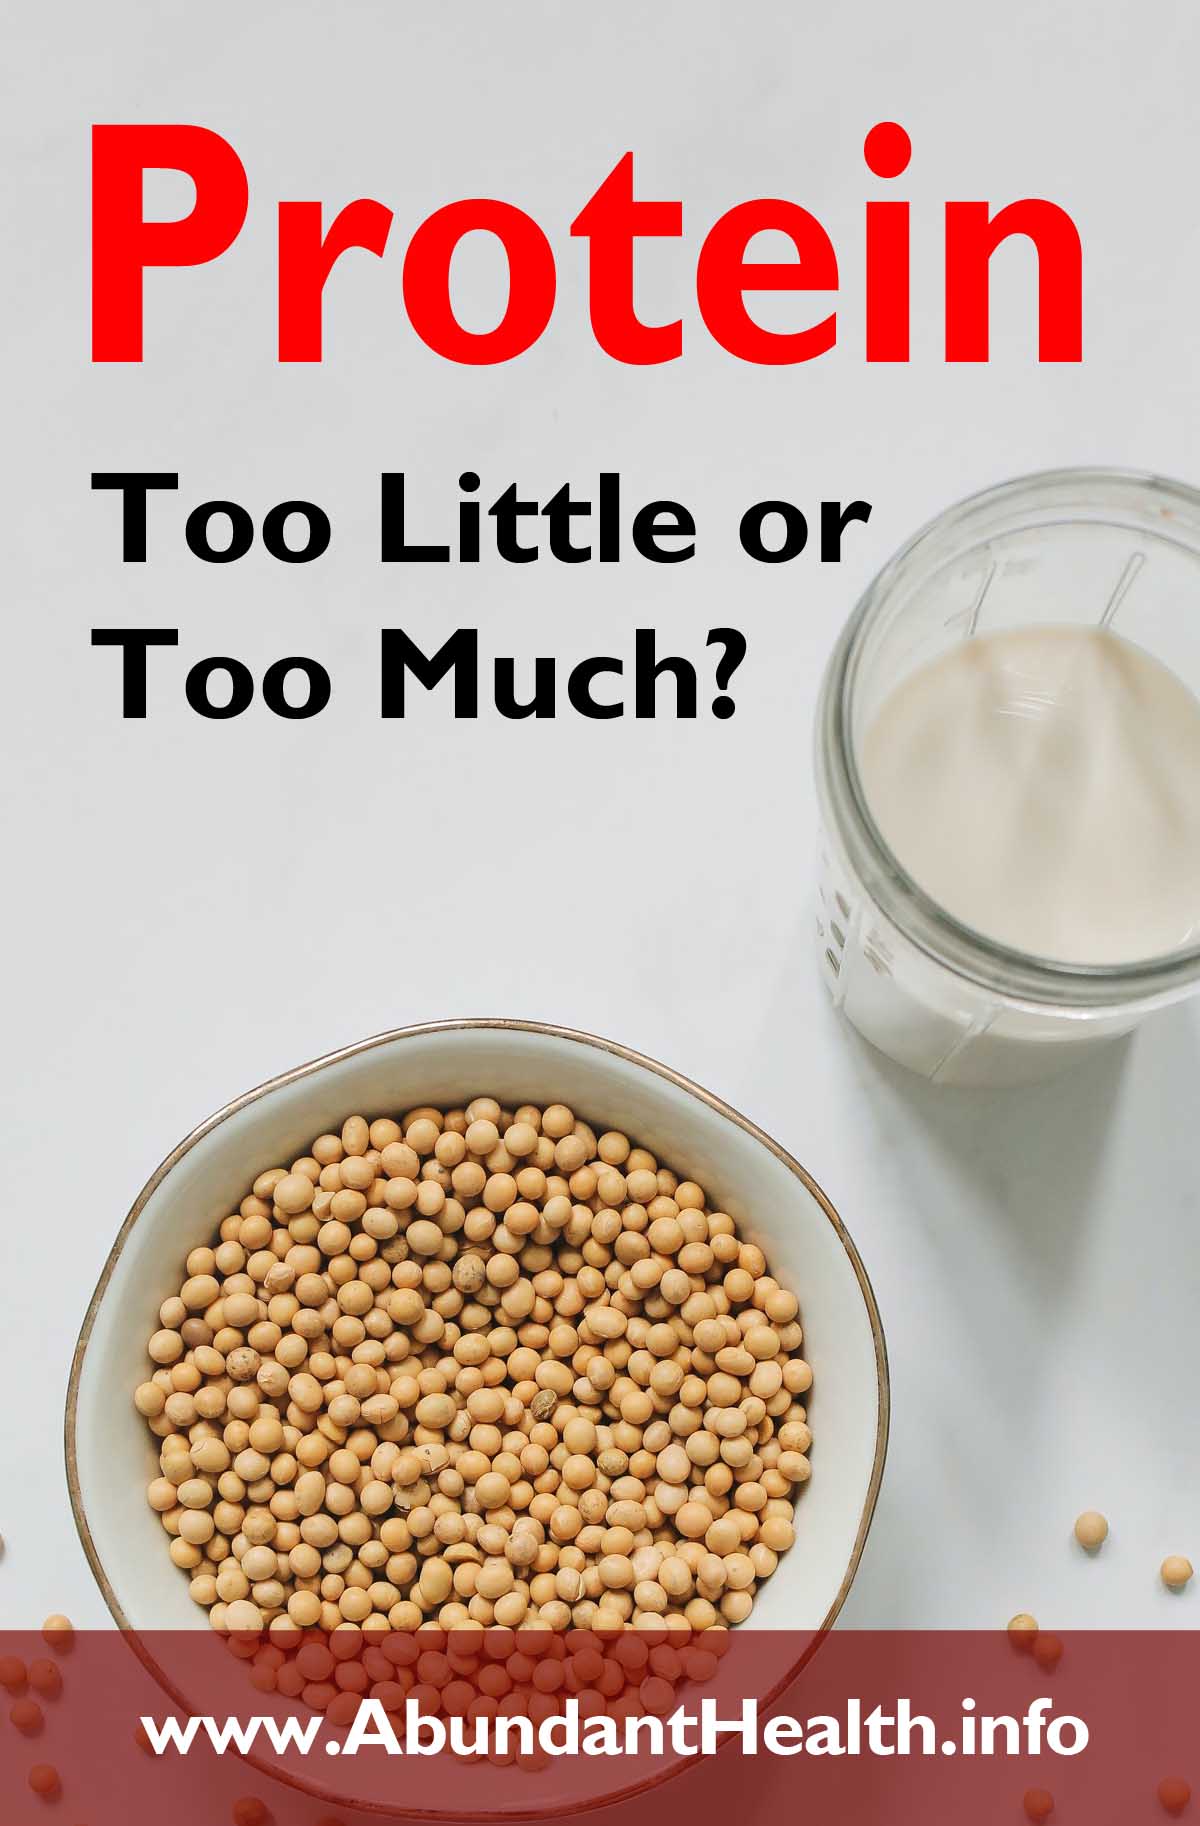 Protein - Too Little or Too Much?